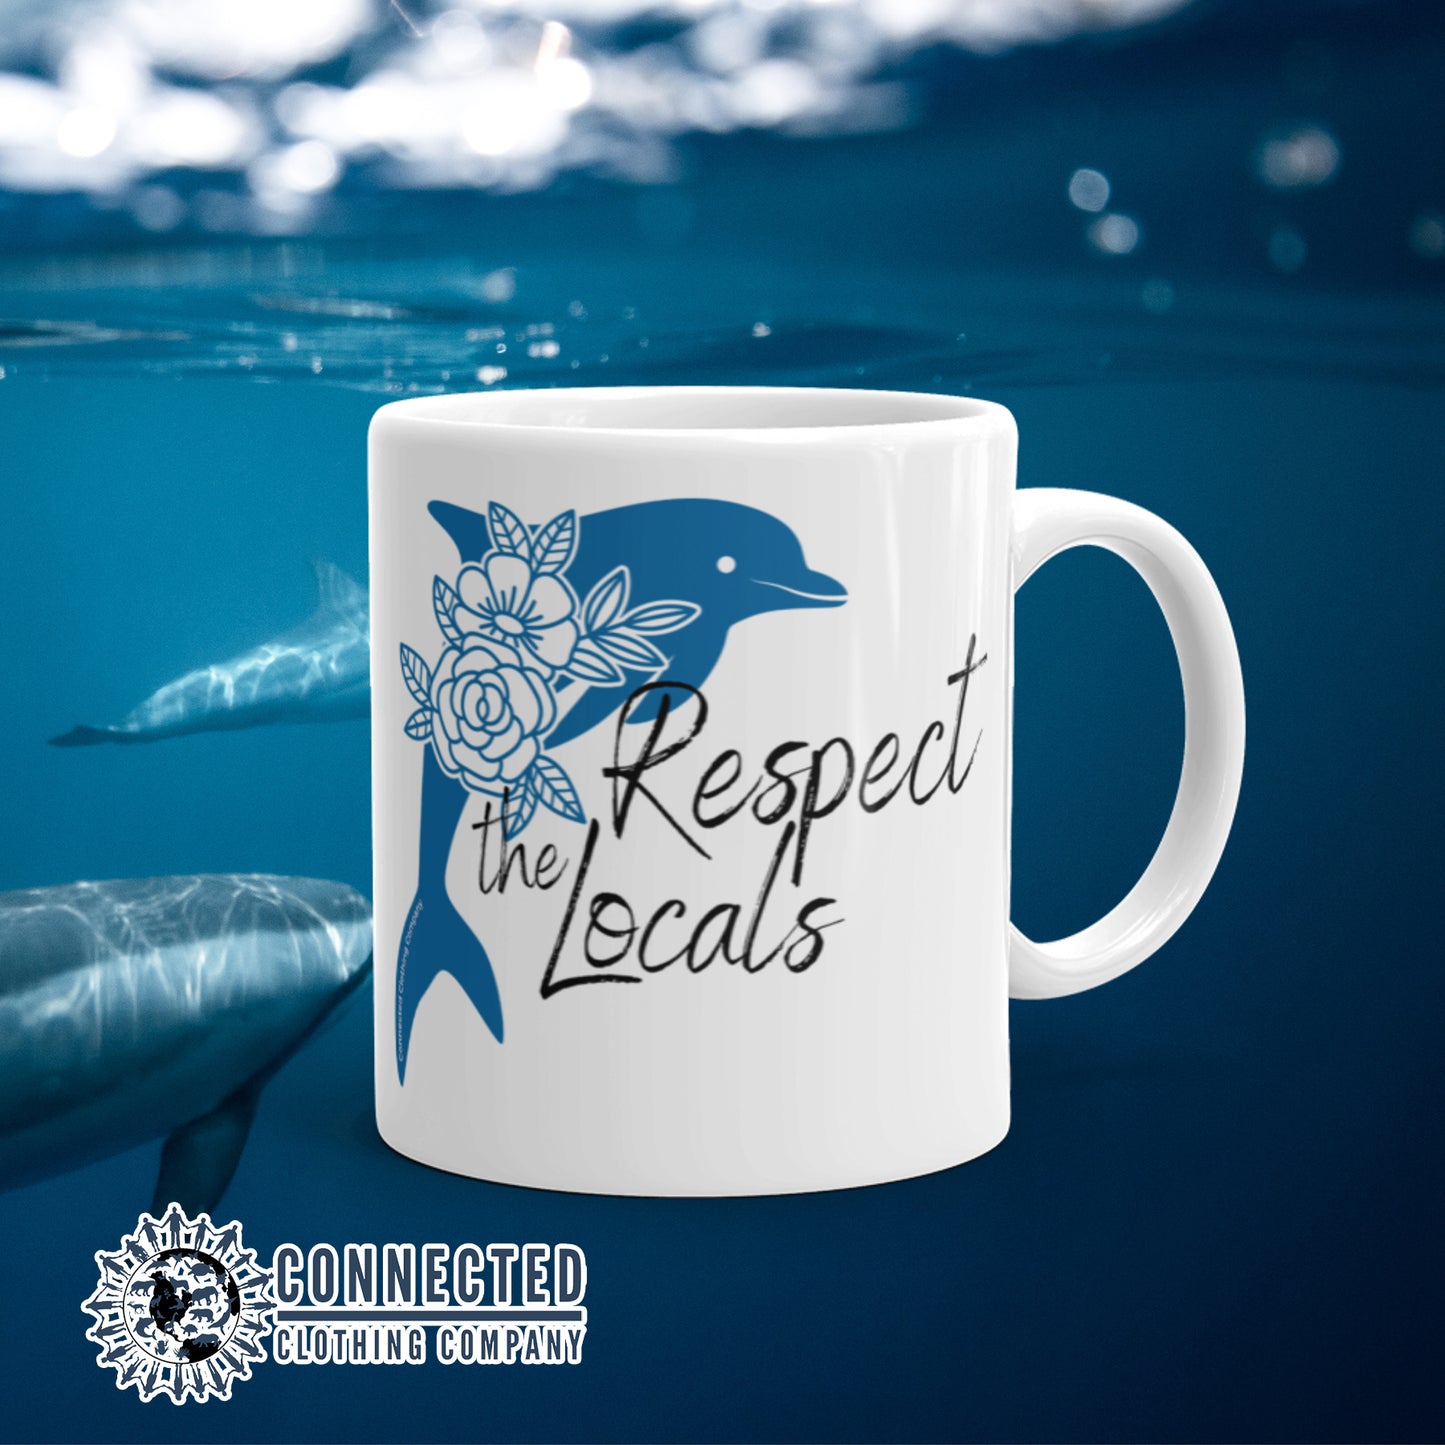 Respect The Locals Dolphin Classic Mug - Connected Clothing Company - Ethical and Sustainable Clothing That Gives Back - 10% donated to Mission Blue ocean conservation